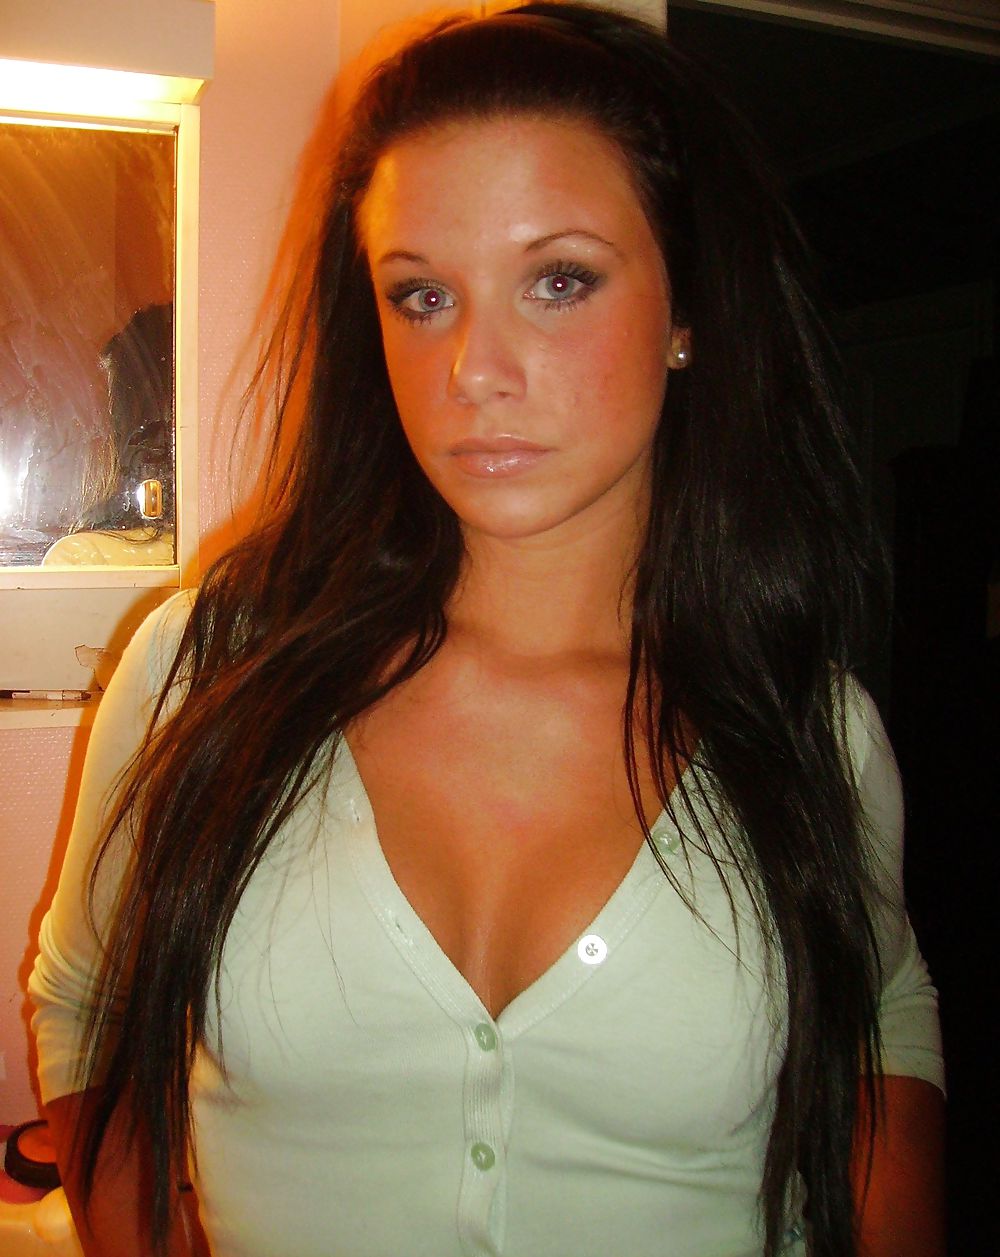 Another hot girl with blue eyes #21442485